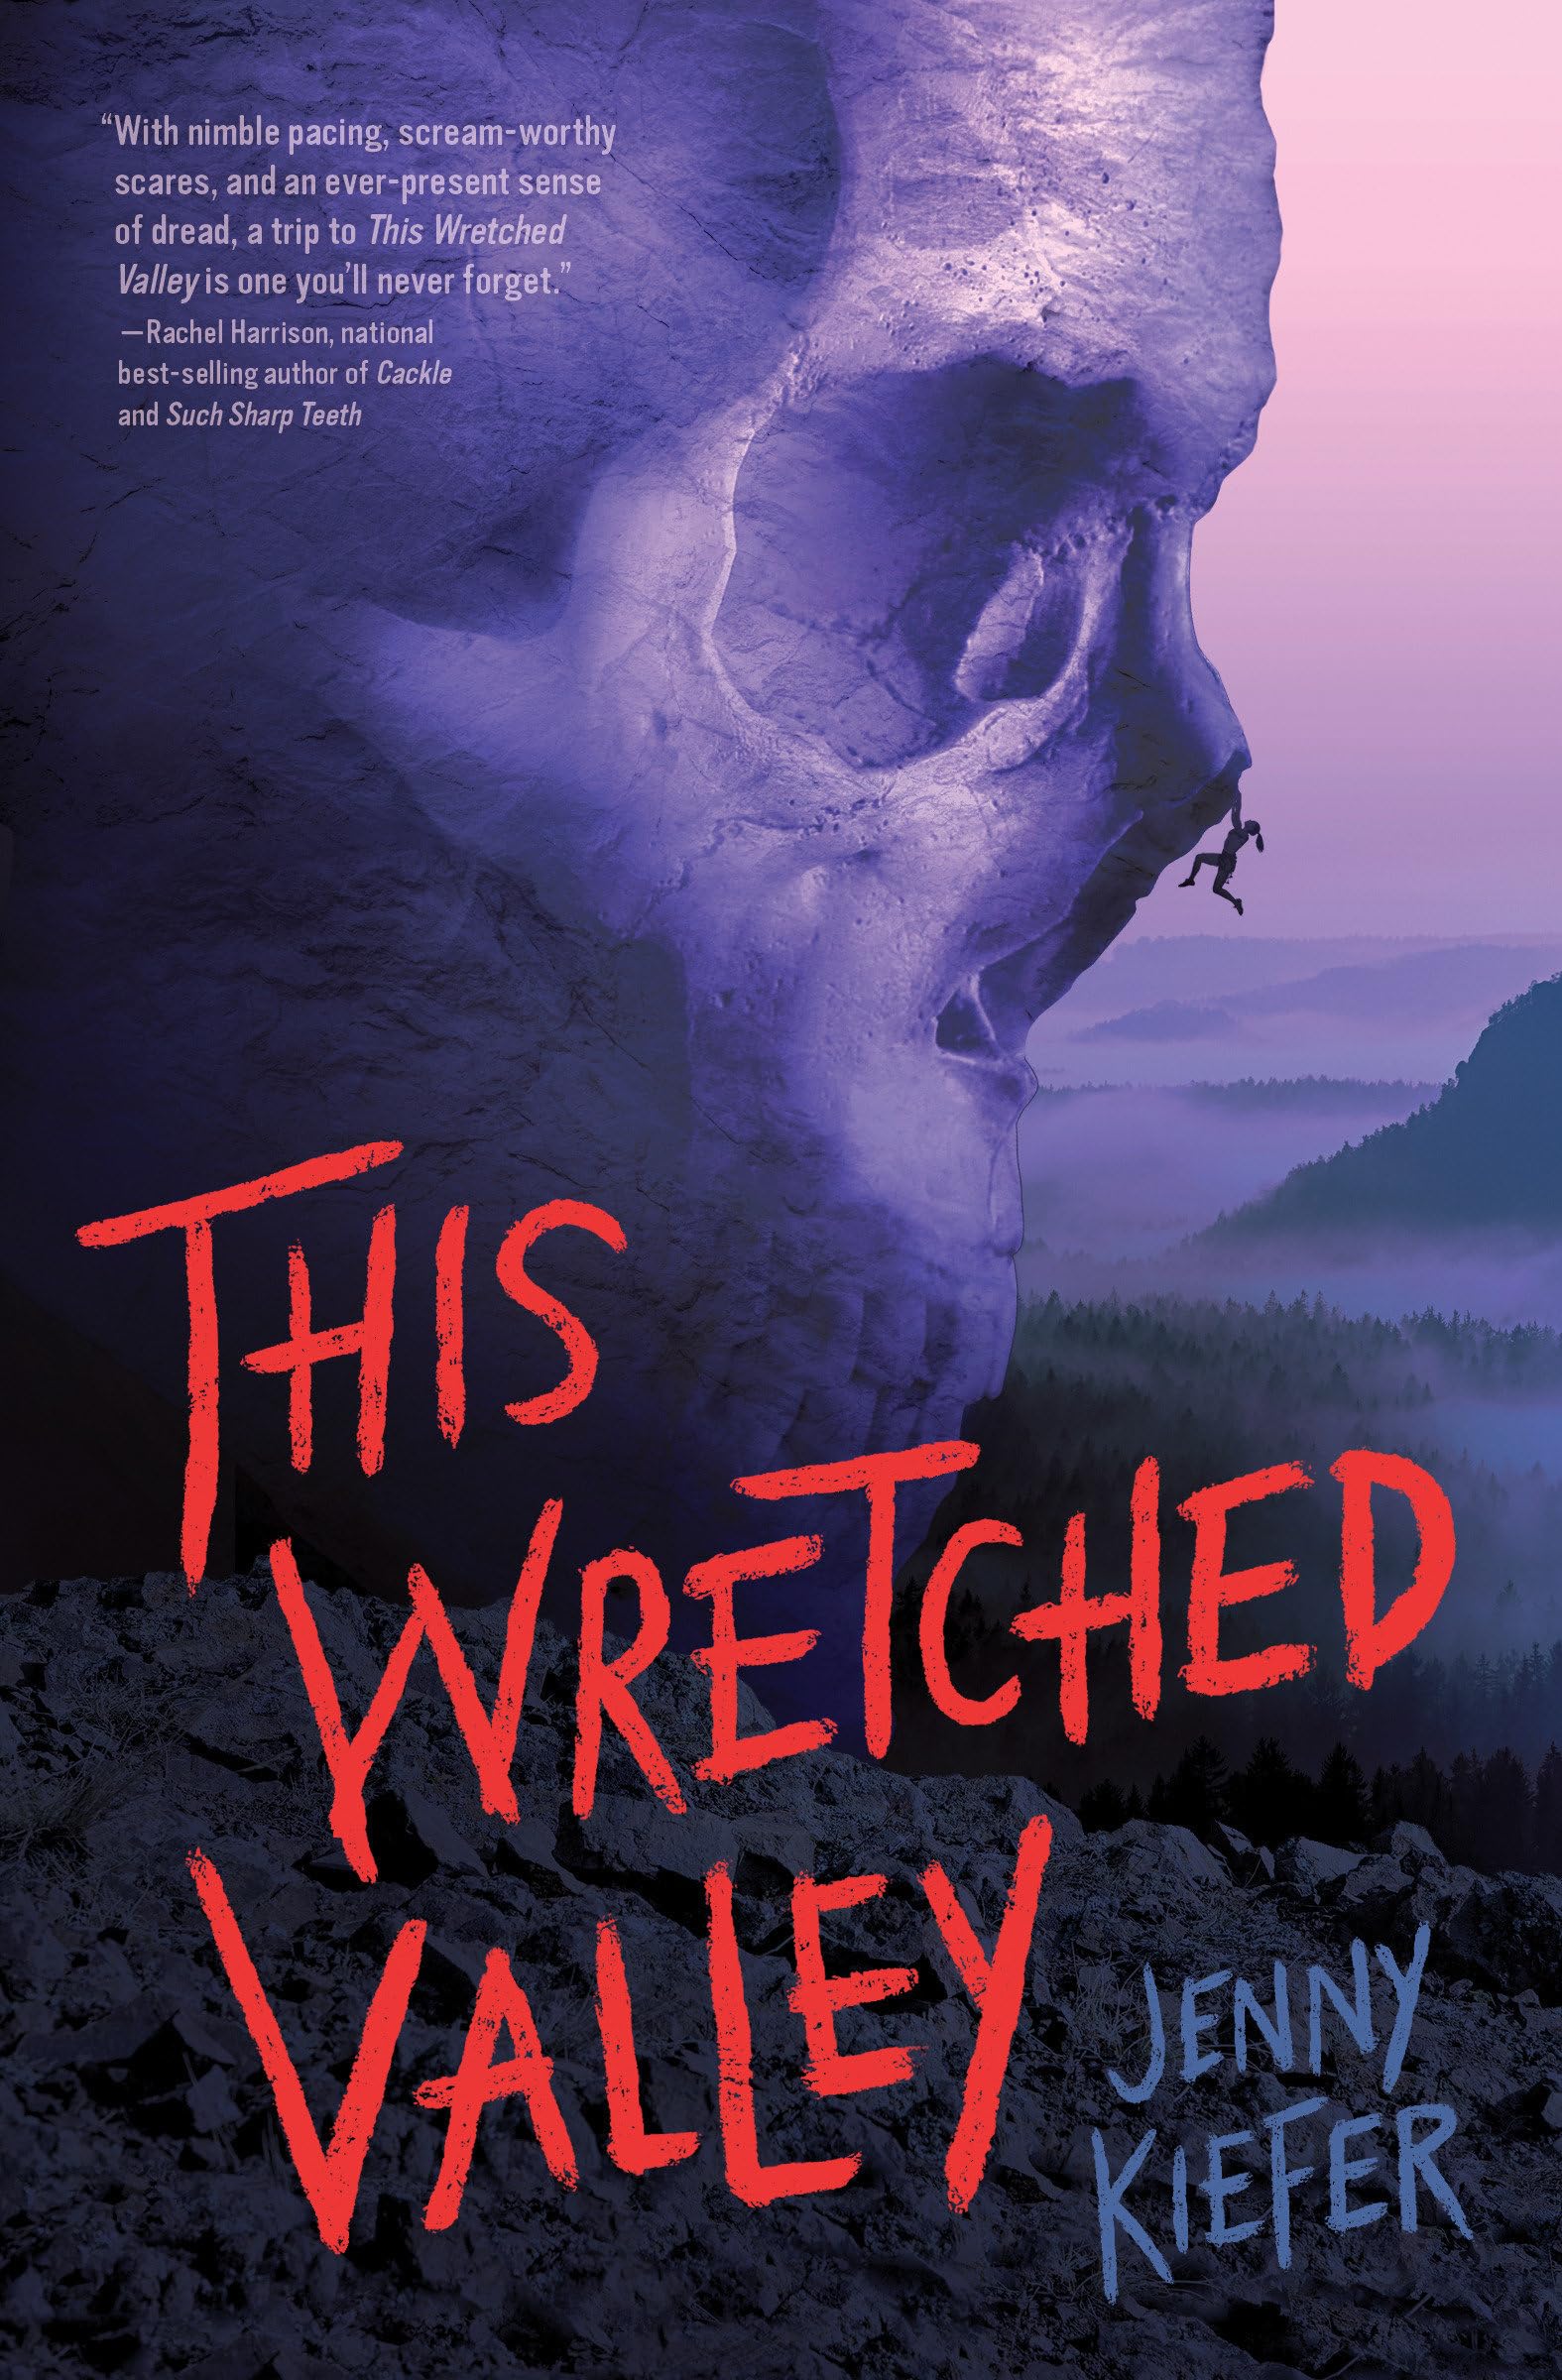 cover of This Wretched Valley by Jenny Kiefer; illustration of a mountain climber hanging from a rock face shaped like a skull